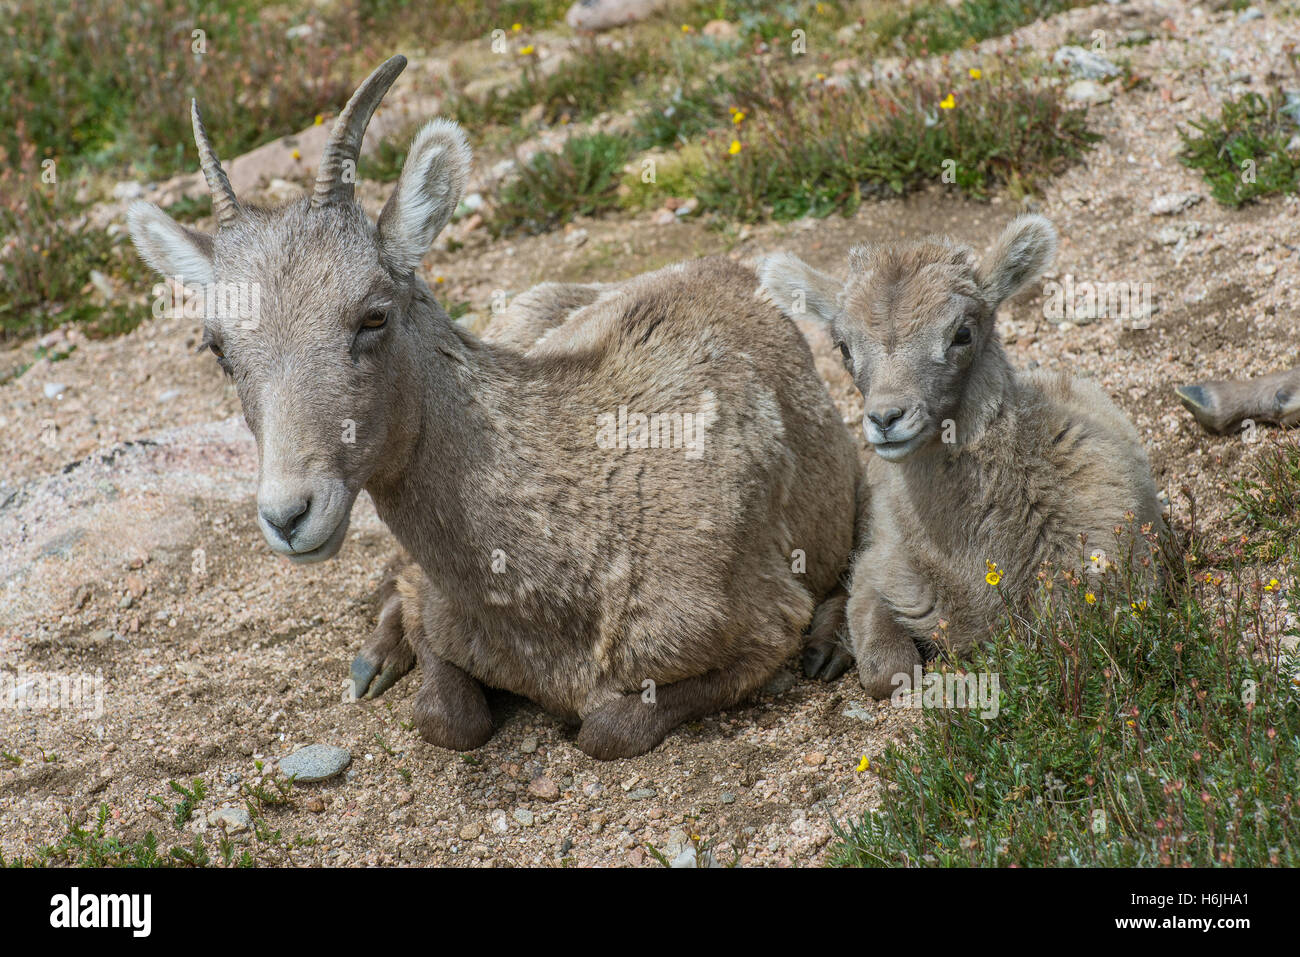 Bighorn Sheep (Ovis canadensis) Ewe and lamb resting on alpine tundra Mount Evans Wilderness Area, Rocky Mountains, Colorado USA Stock Photo